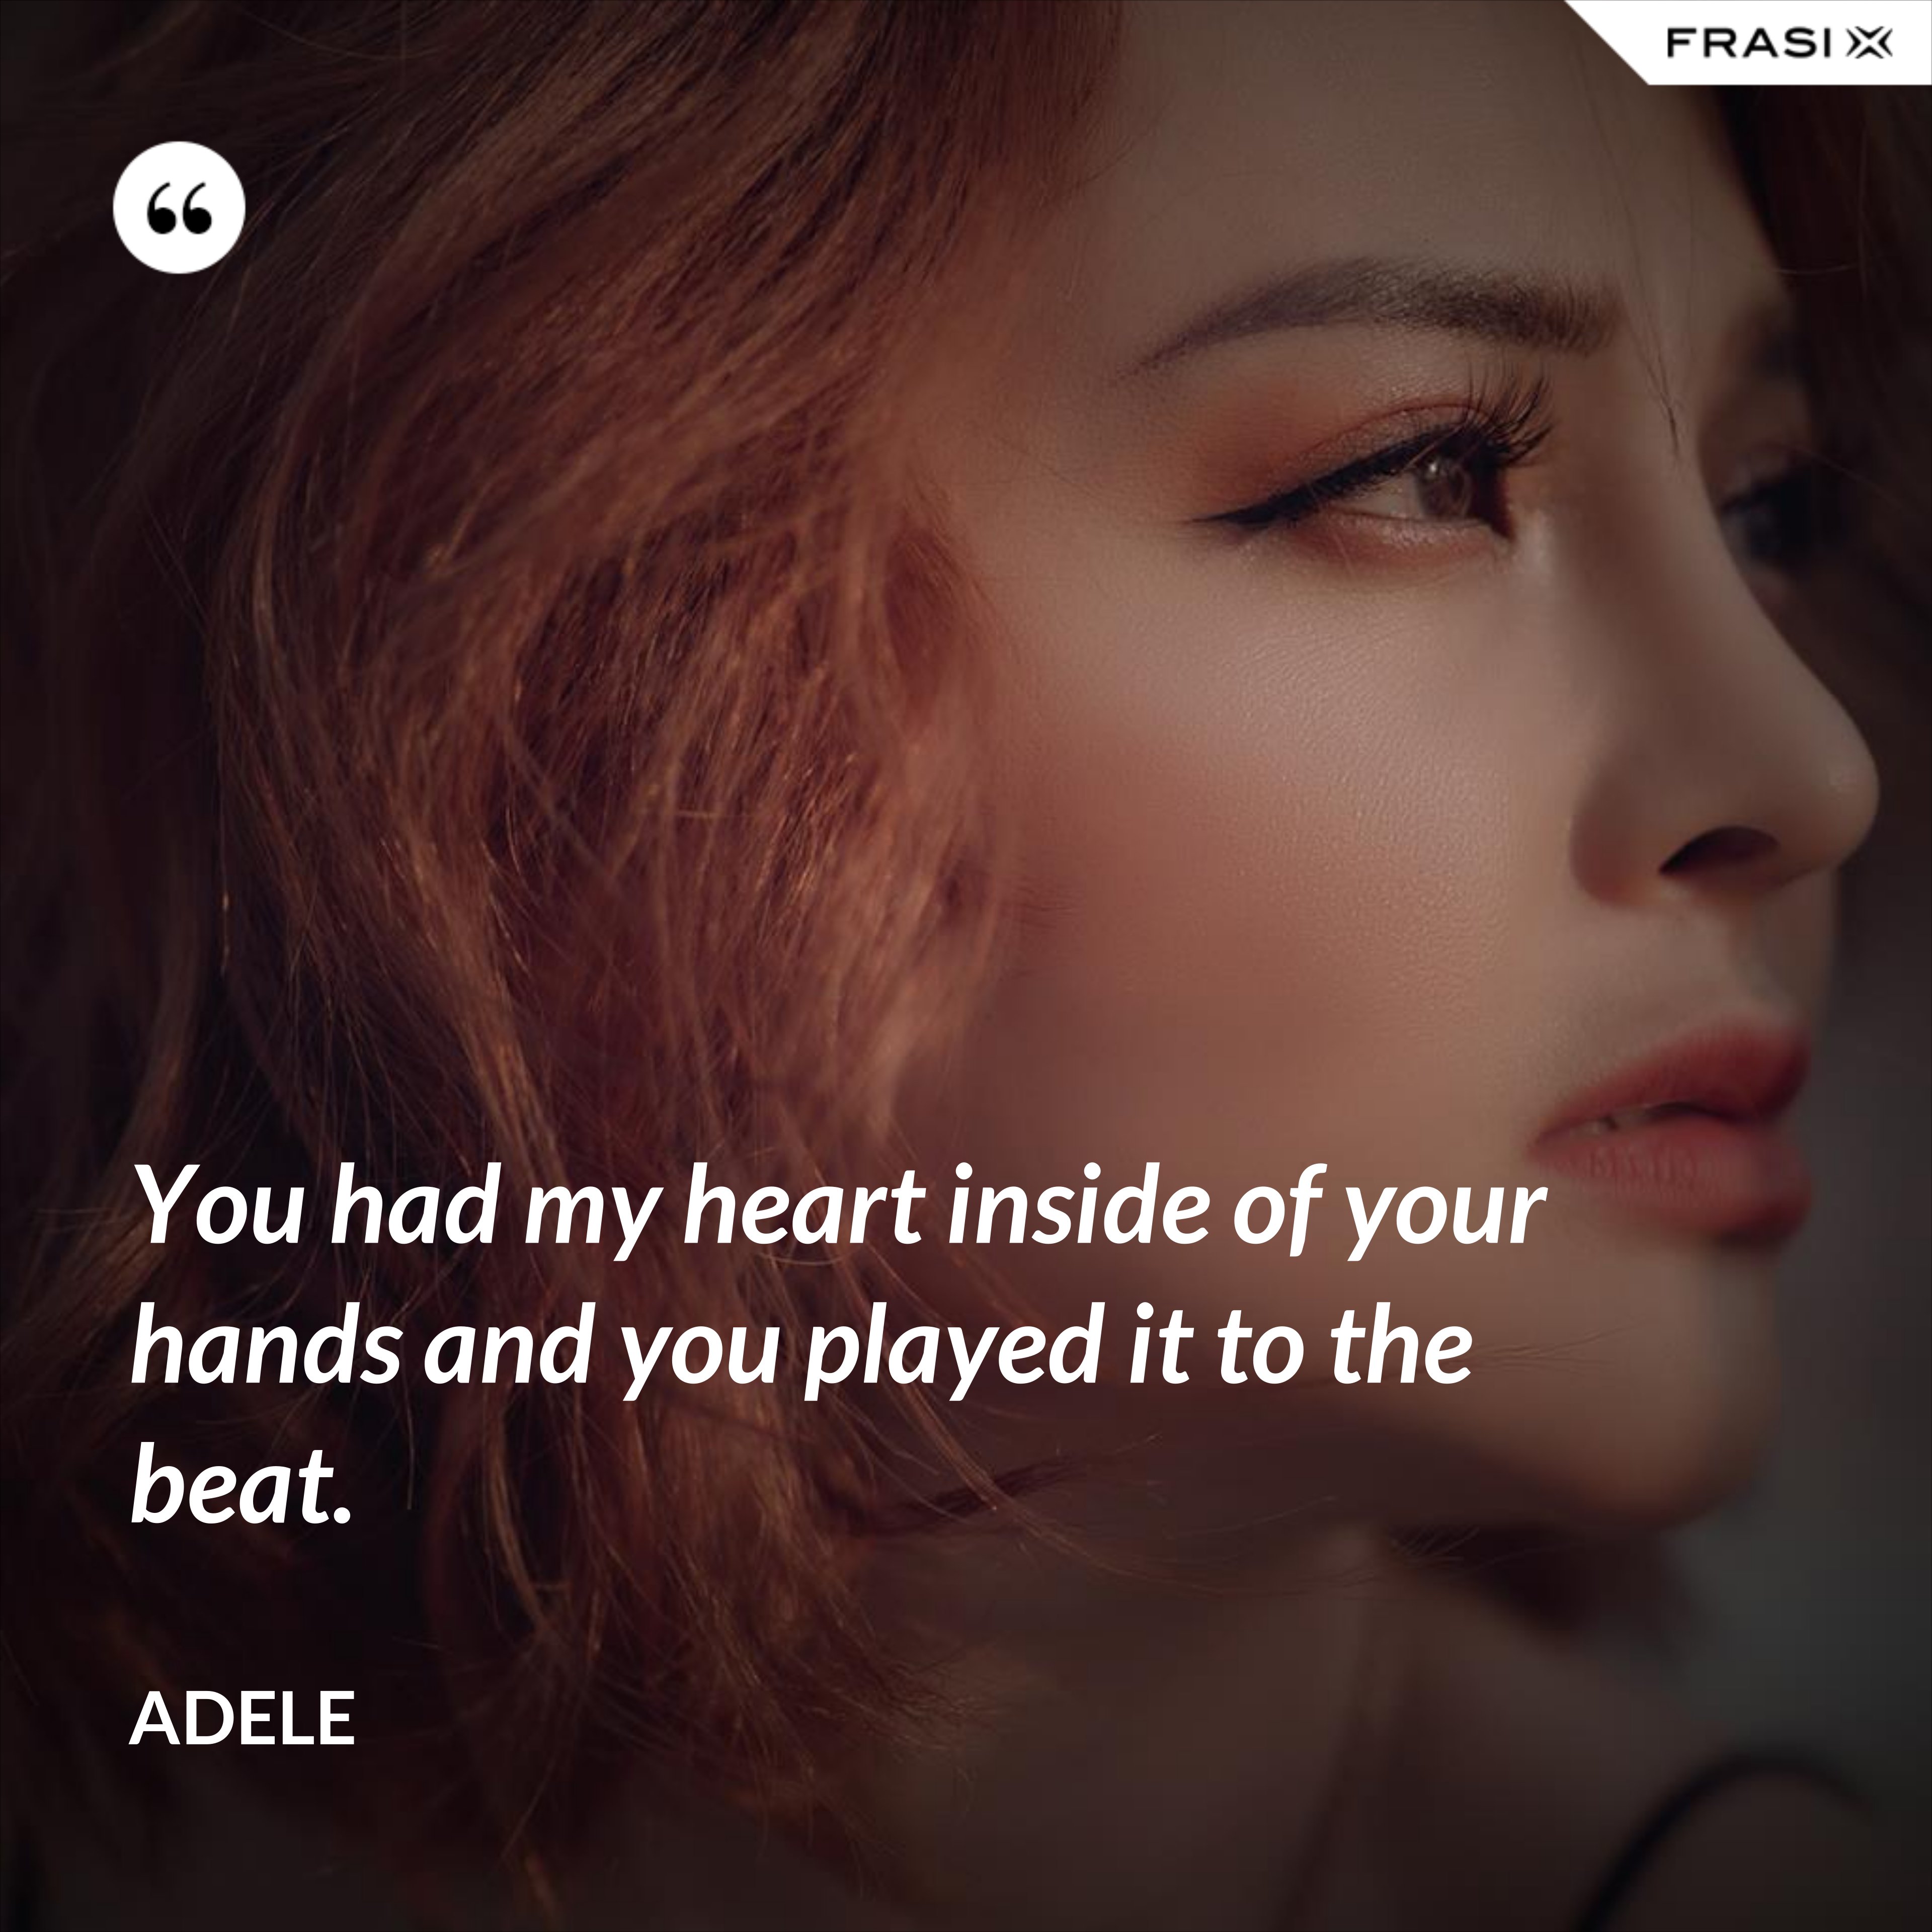 You had my heart inside of your hands and you played it to the beat. - Adele